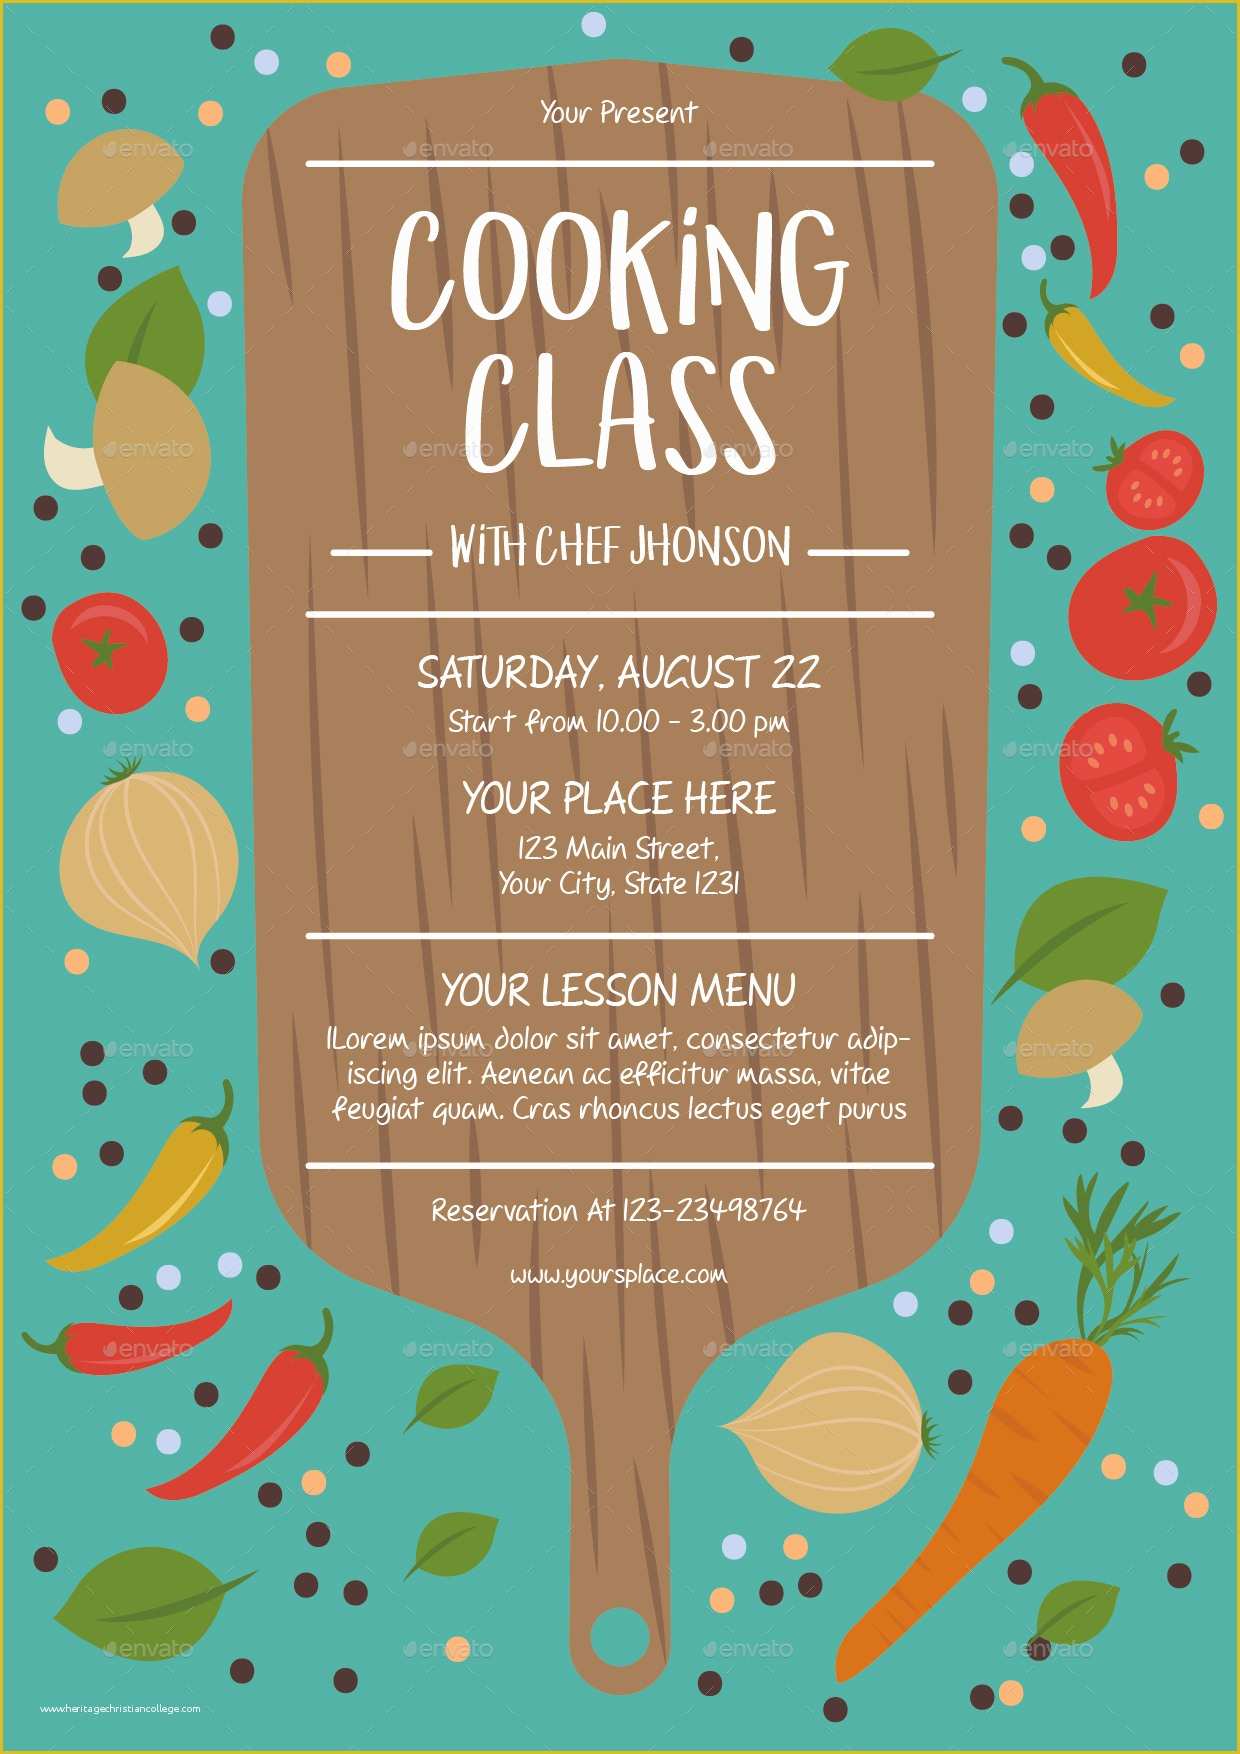 Cooking Flyers Templates Free Of Cooking Class Flyer Template by Lyllopop